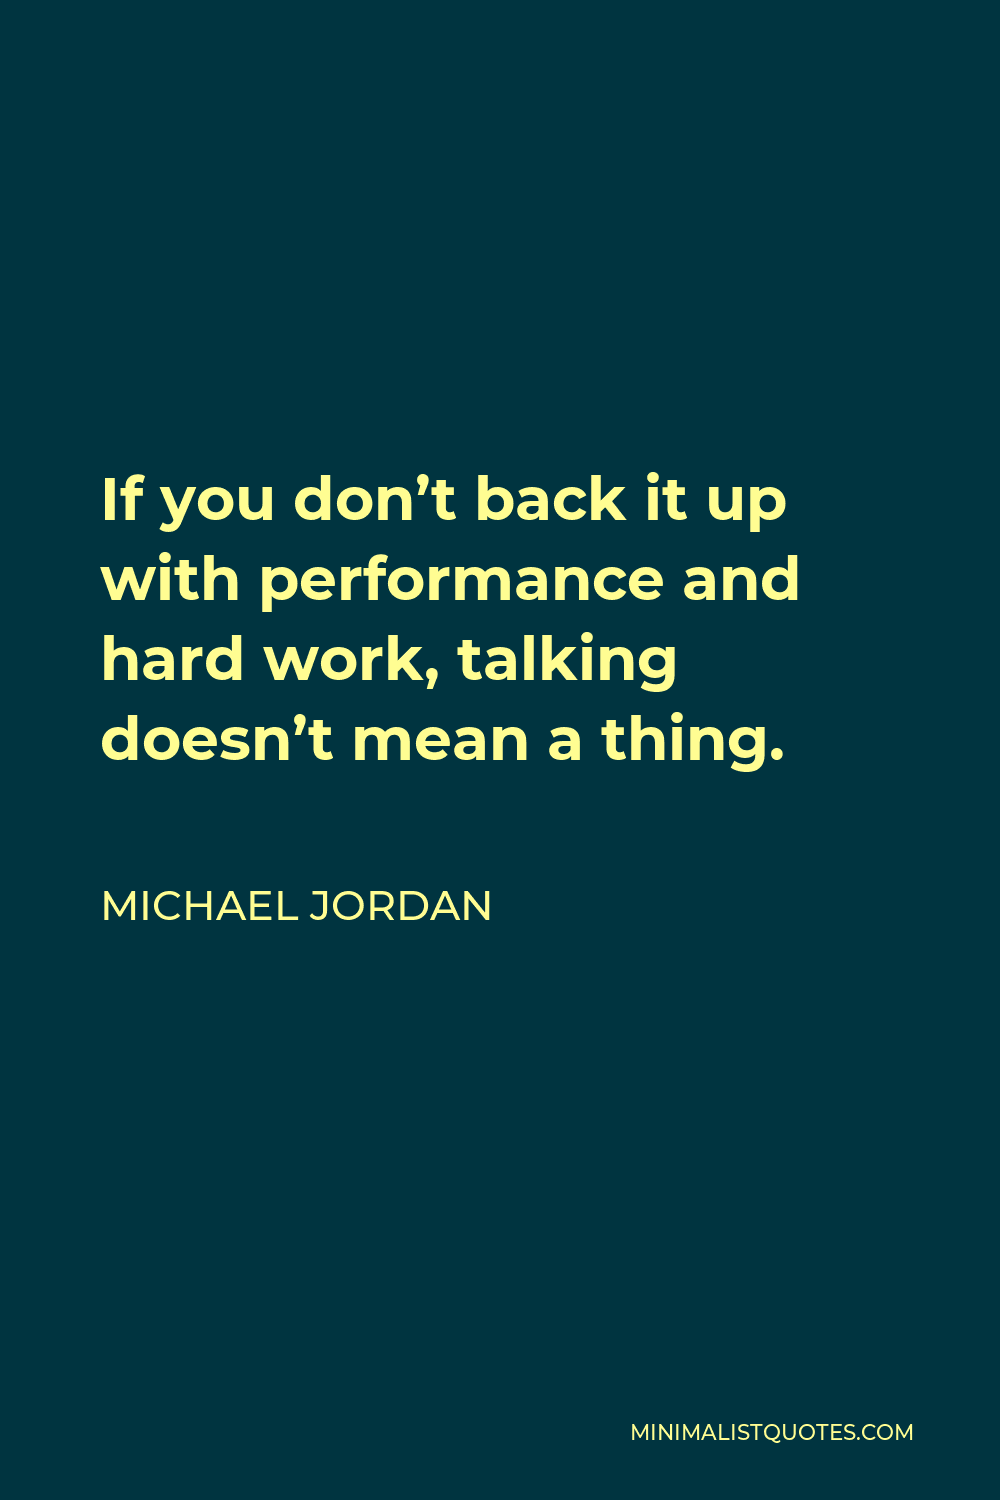 Michael Jordan Quote - If you don’t back it up with performance and hard work, talking doesn’t mean a thing.